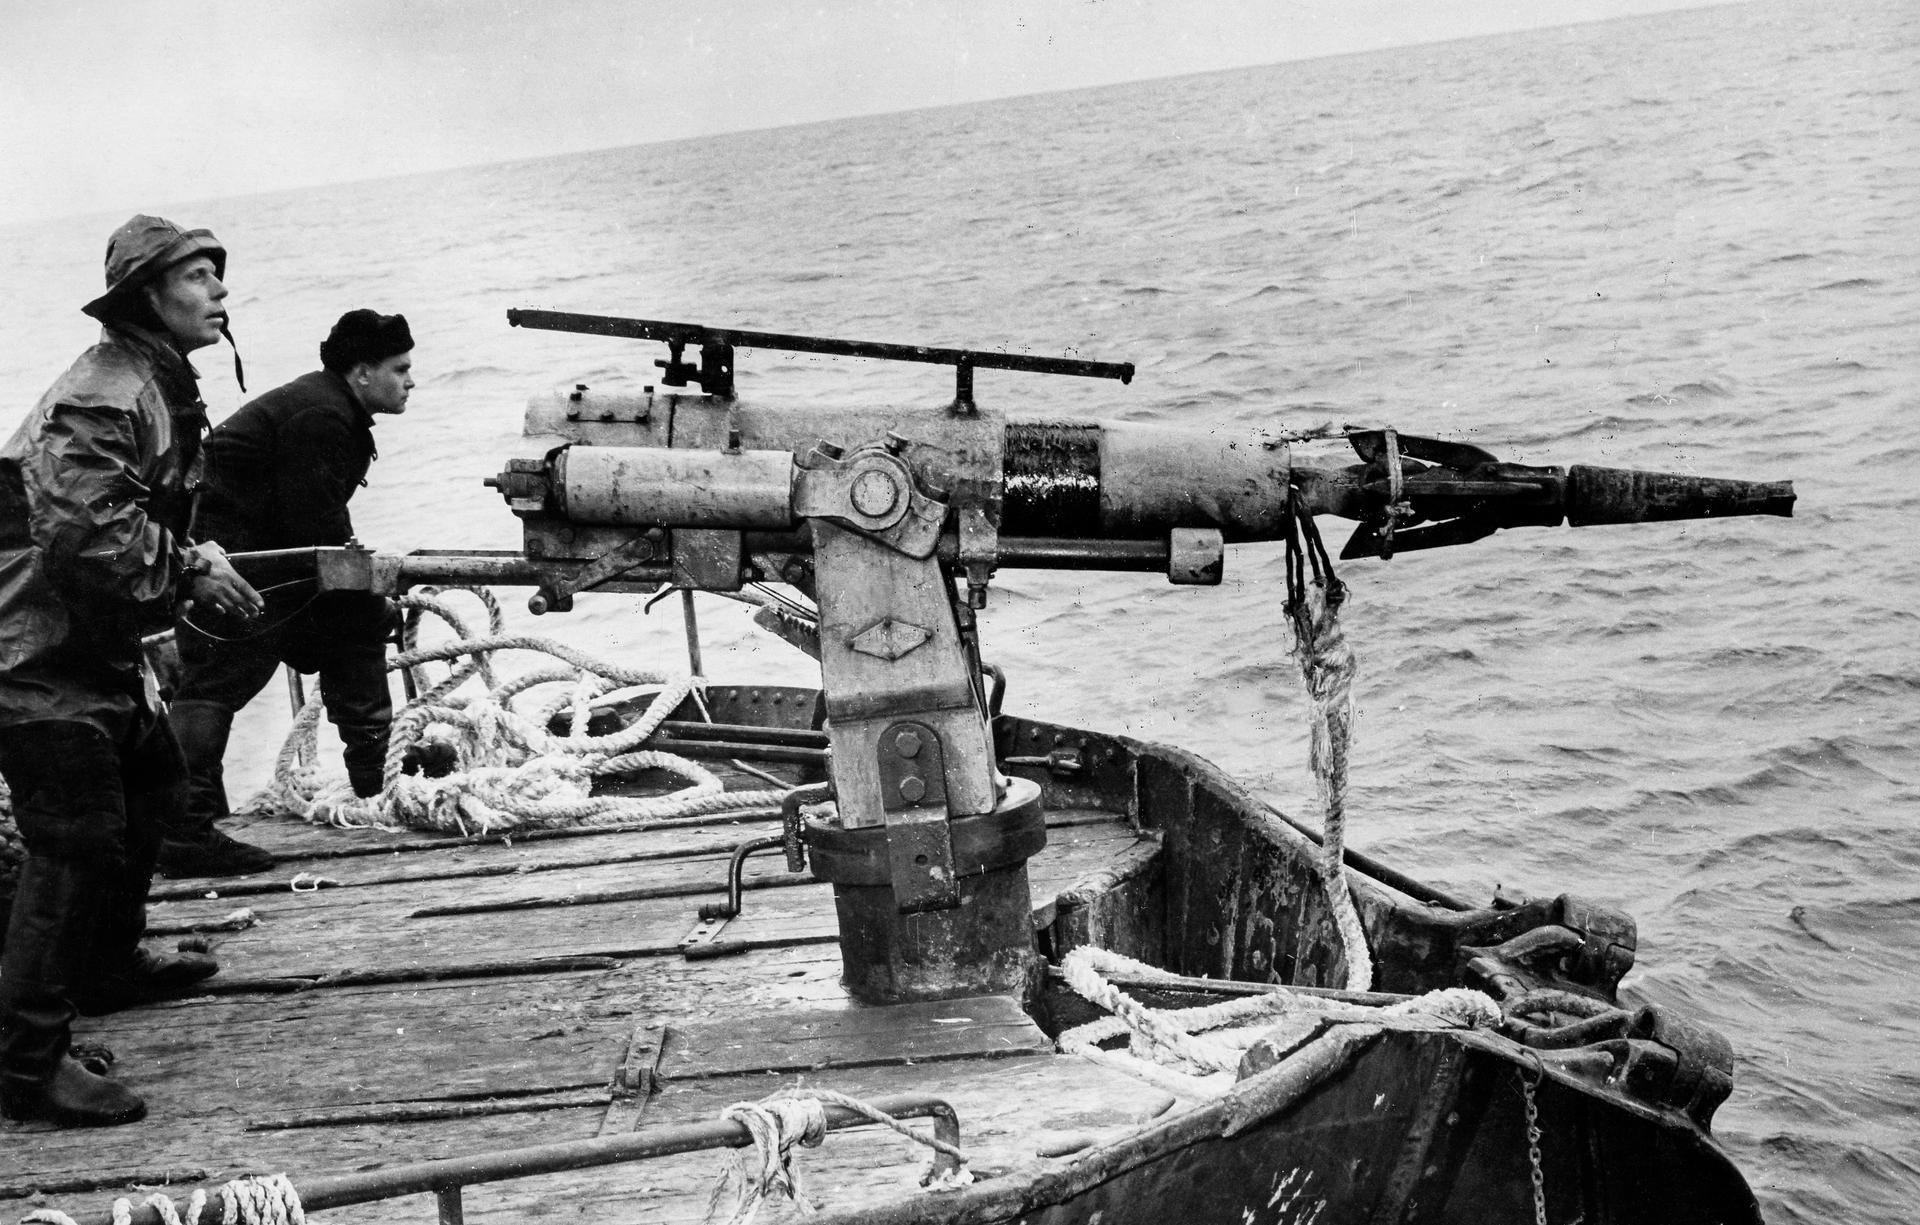 Black-and-white photo of two men in outdoor gear standing besides a large harpoon gun on a boat